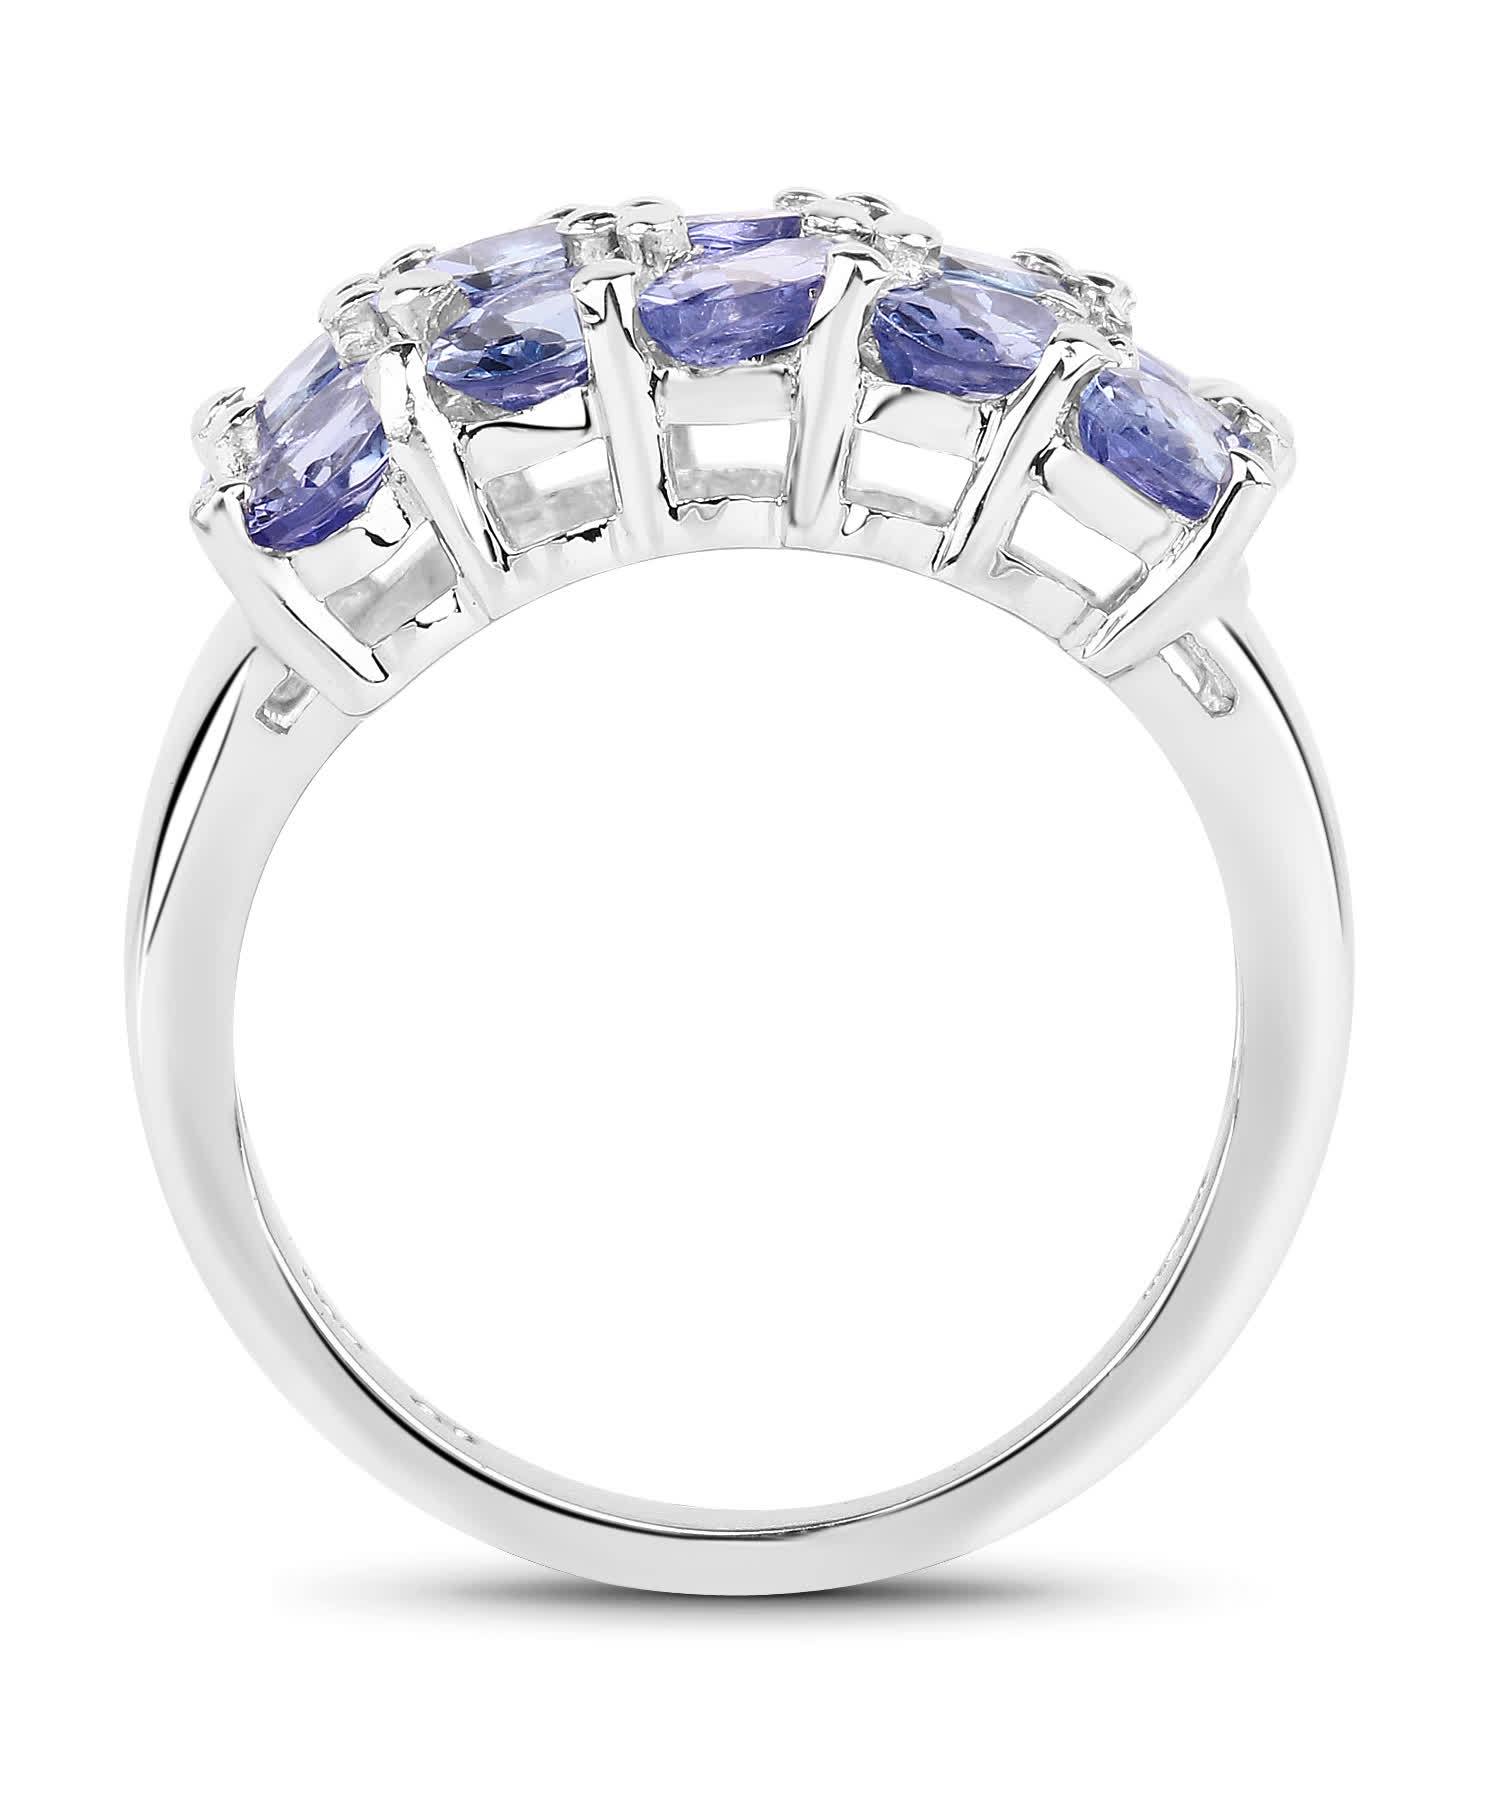 3.60ctw Natural Tanzanite Rhodium Plated 925 Sterling Silver Cocktail Ring View 2